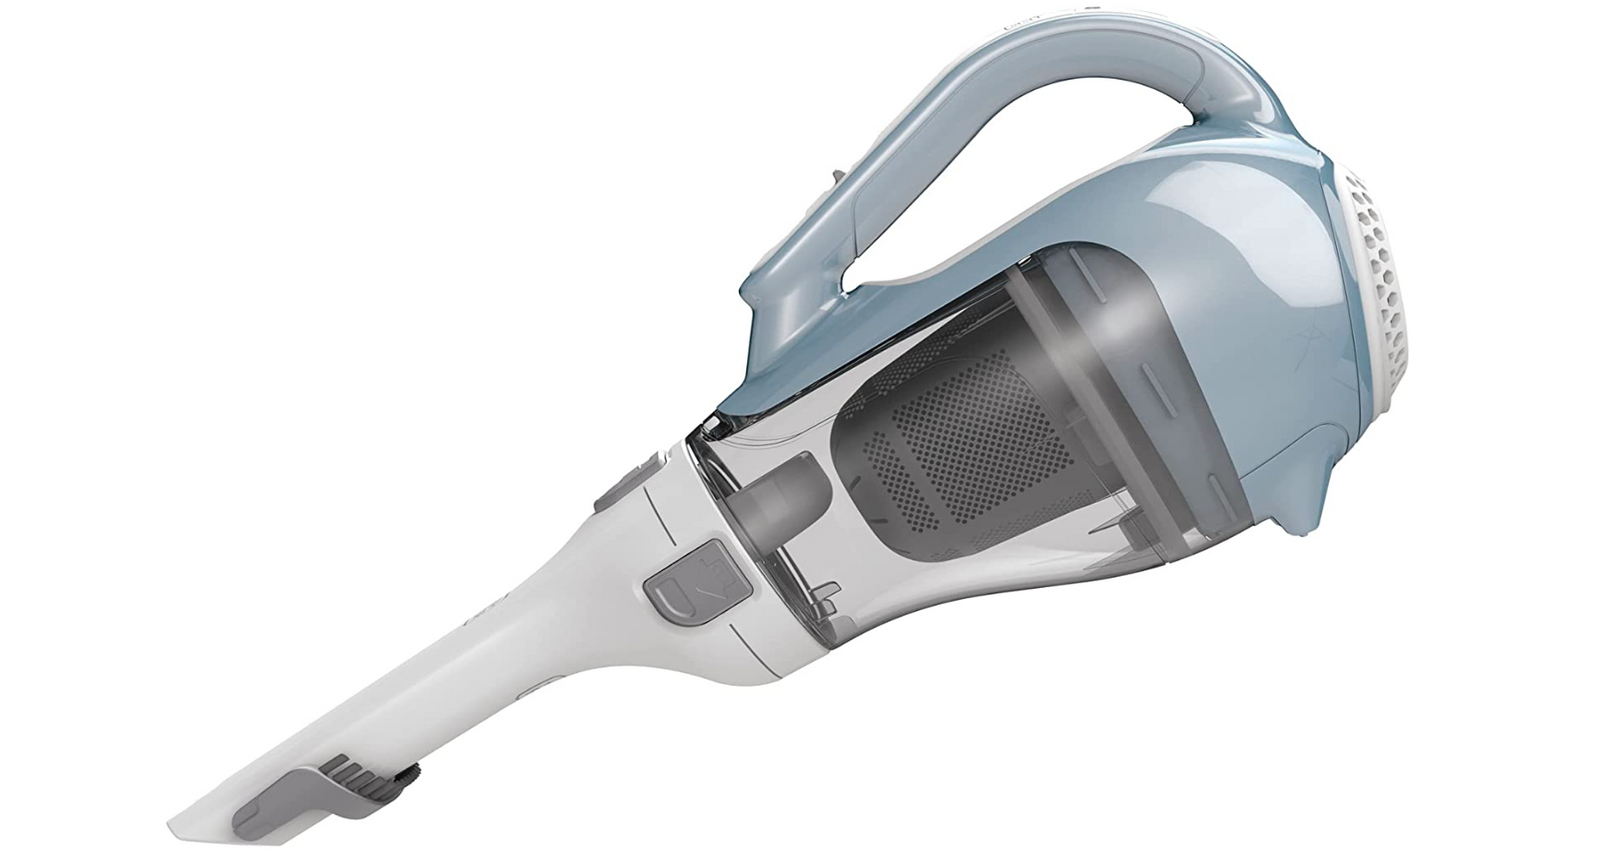 BLACK+DECKER dustbuster CHV1410L product image of a light blue, white, and grey cordless vacuum.